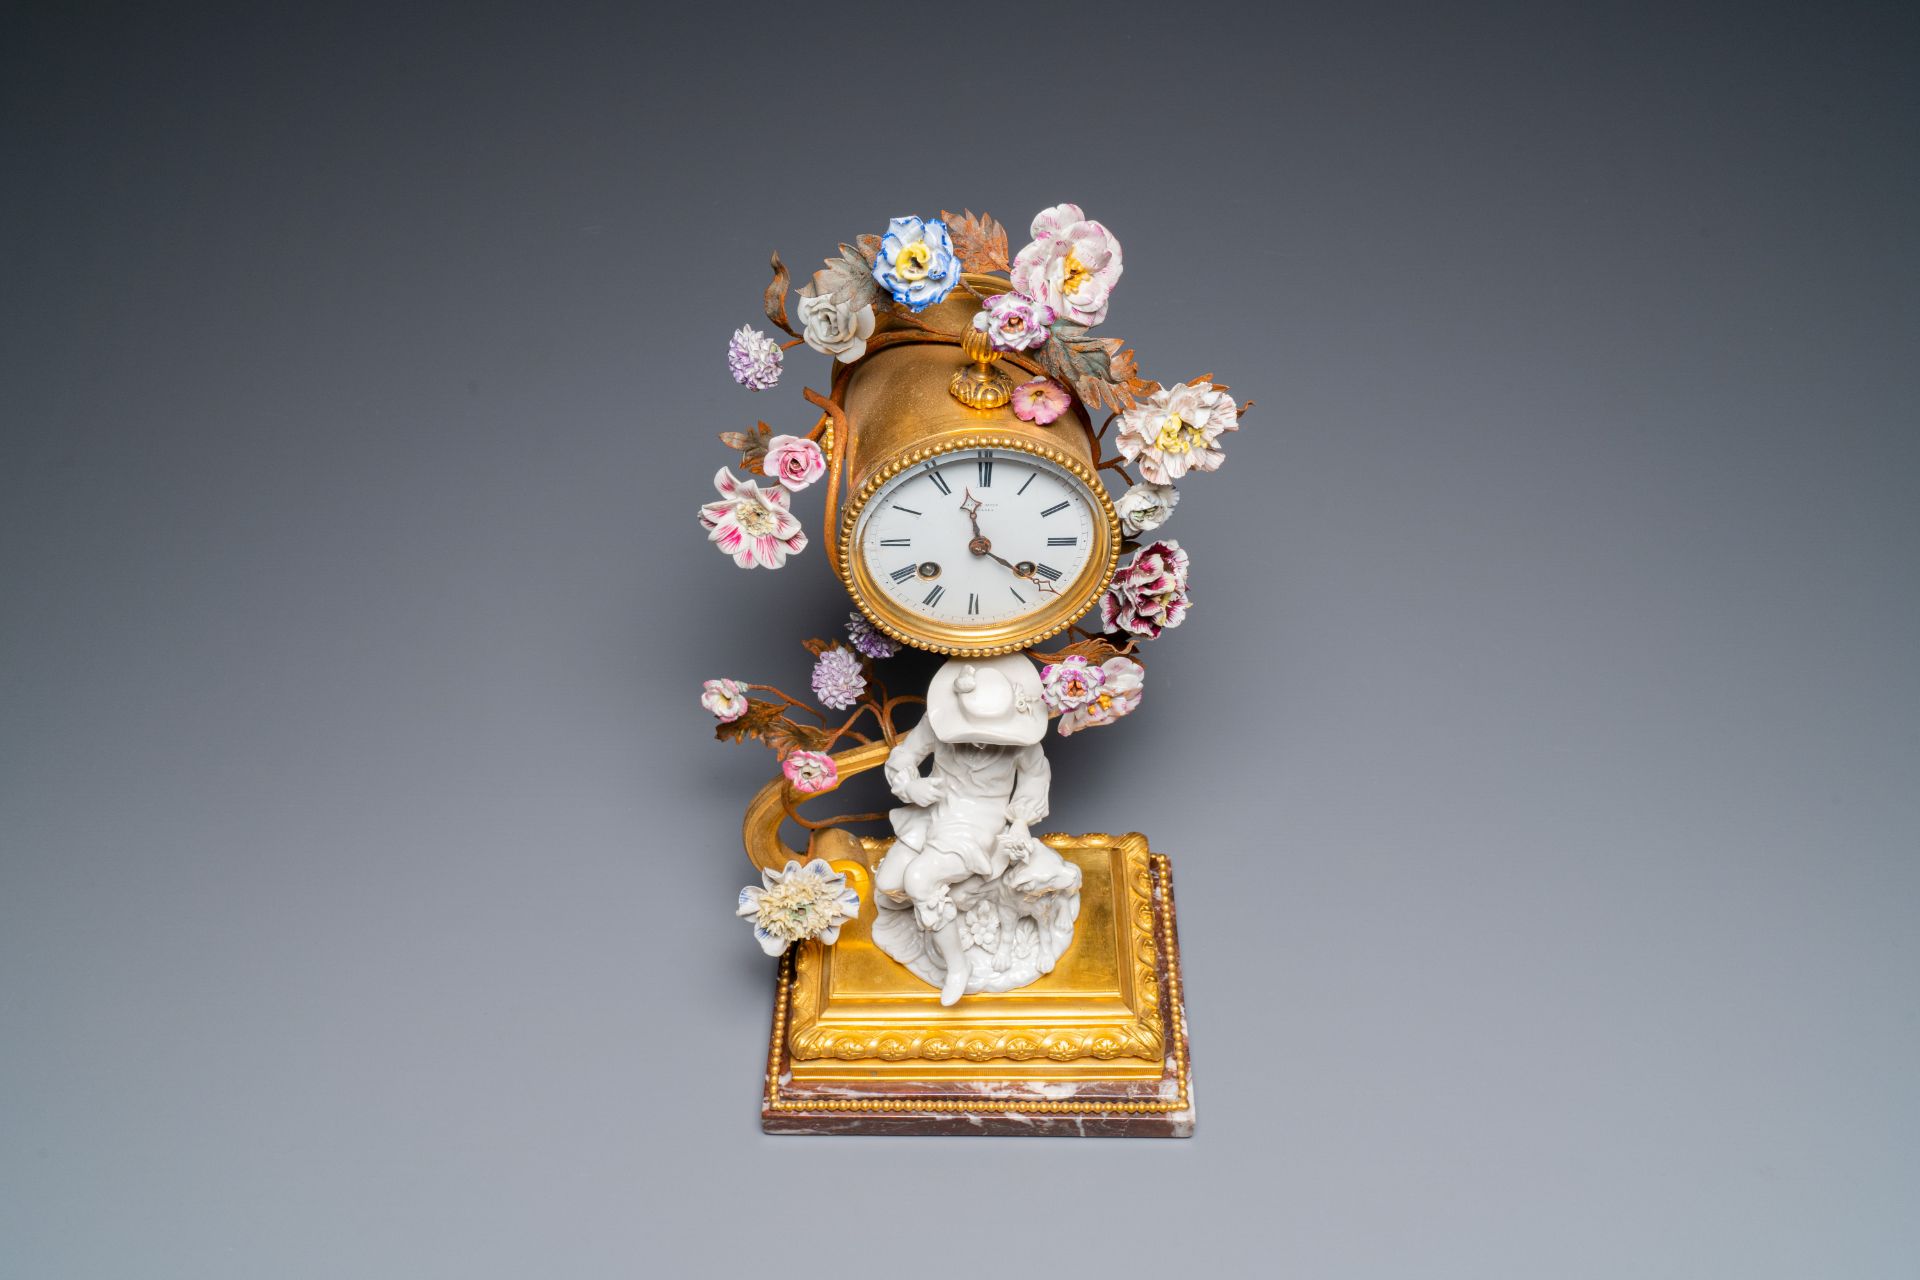 A French ormolu-mounted porcelain mantel clock, 18/19th C. - Image 18 of 28